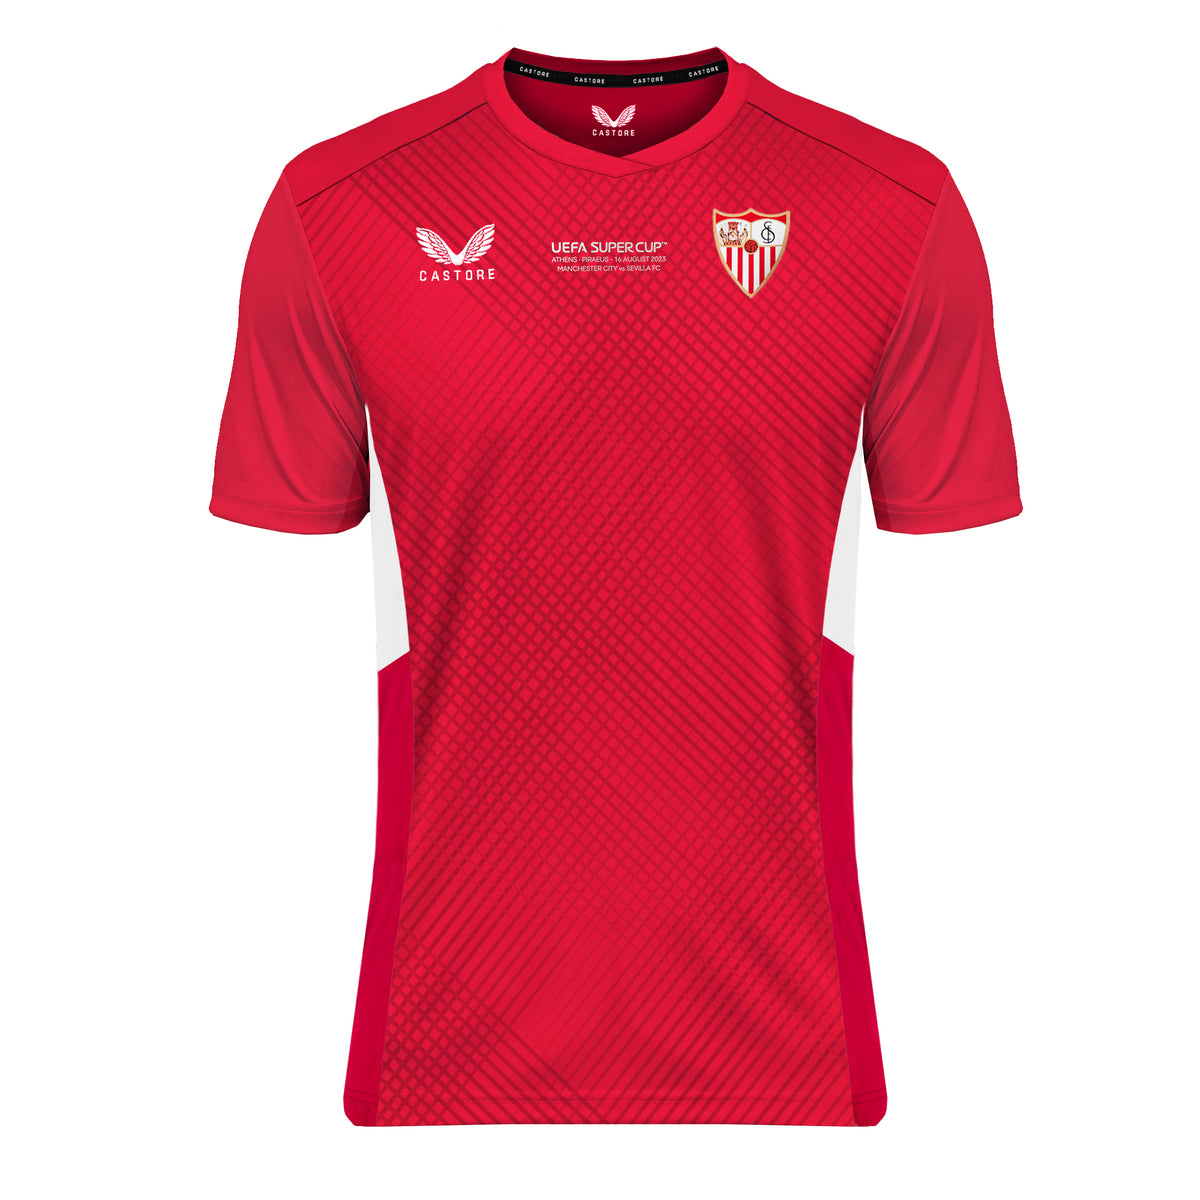 Adults Red Super Cup 23/24 Shirt